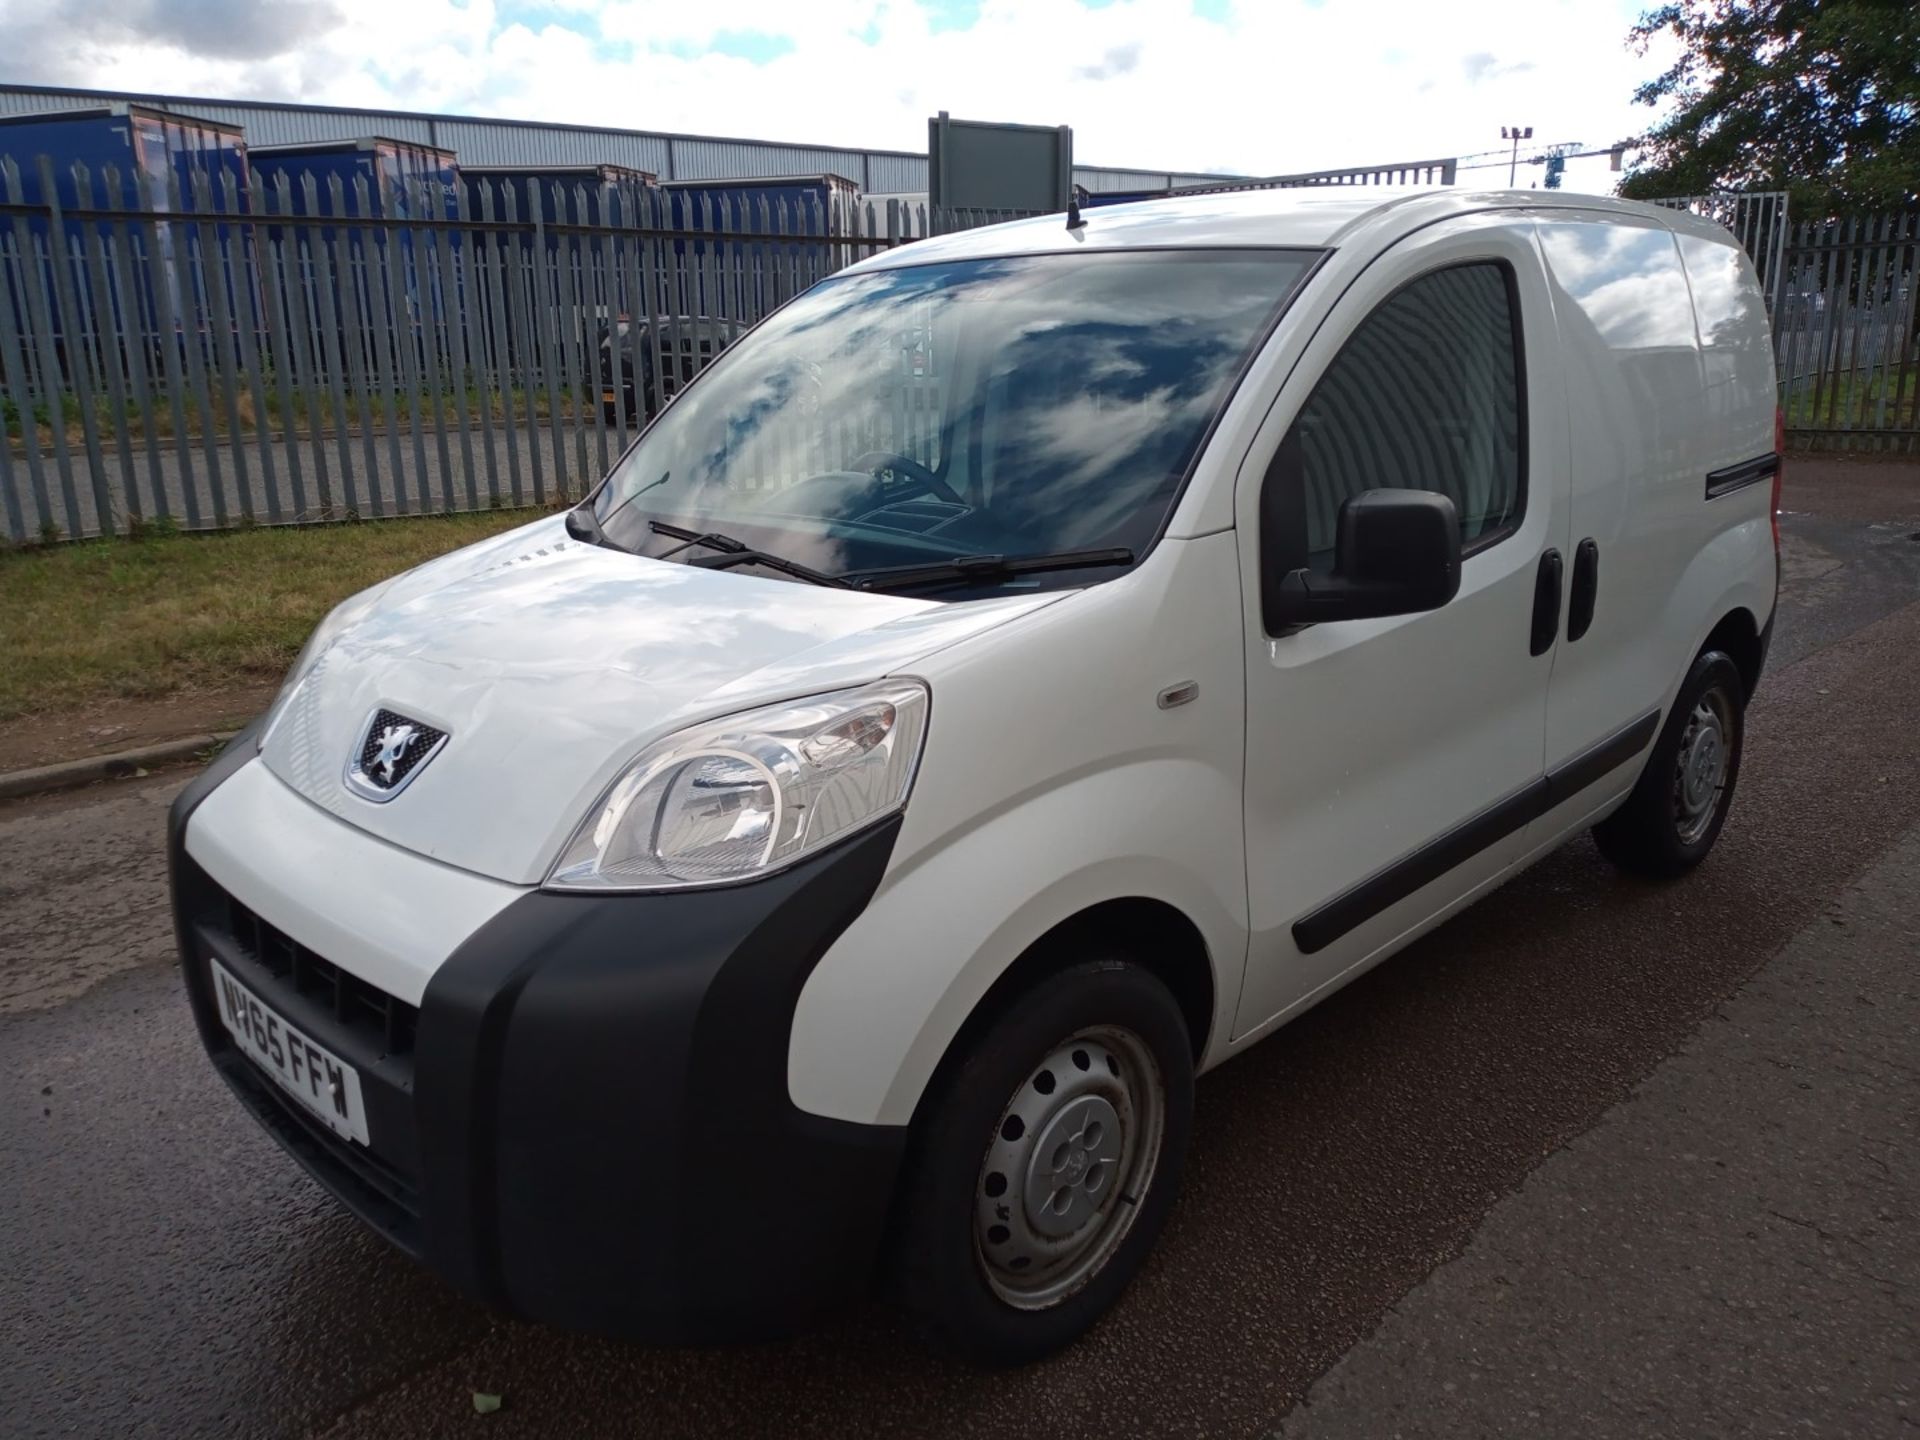 2015 Peugeot Bipper S Hdi White Panel - CL505 - Ref: VVS031 - Location: Corby, Northamptonshire